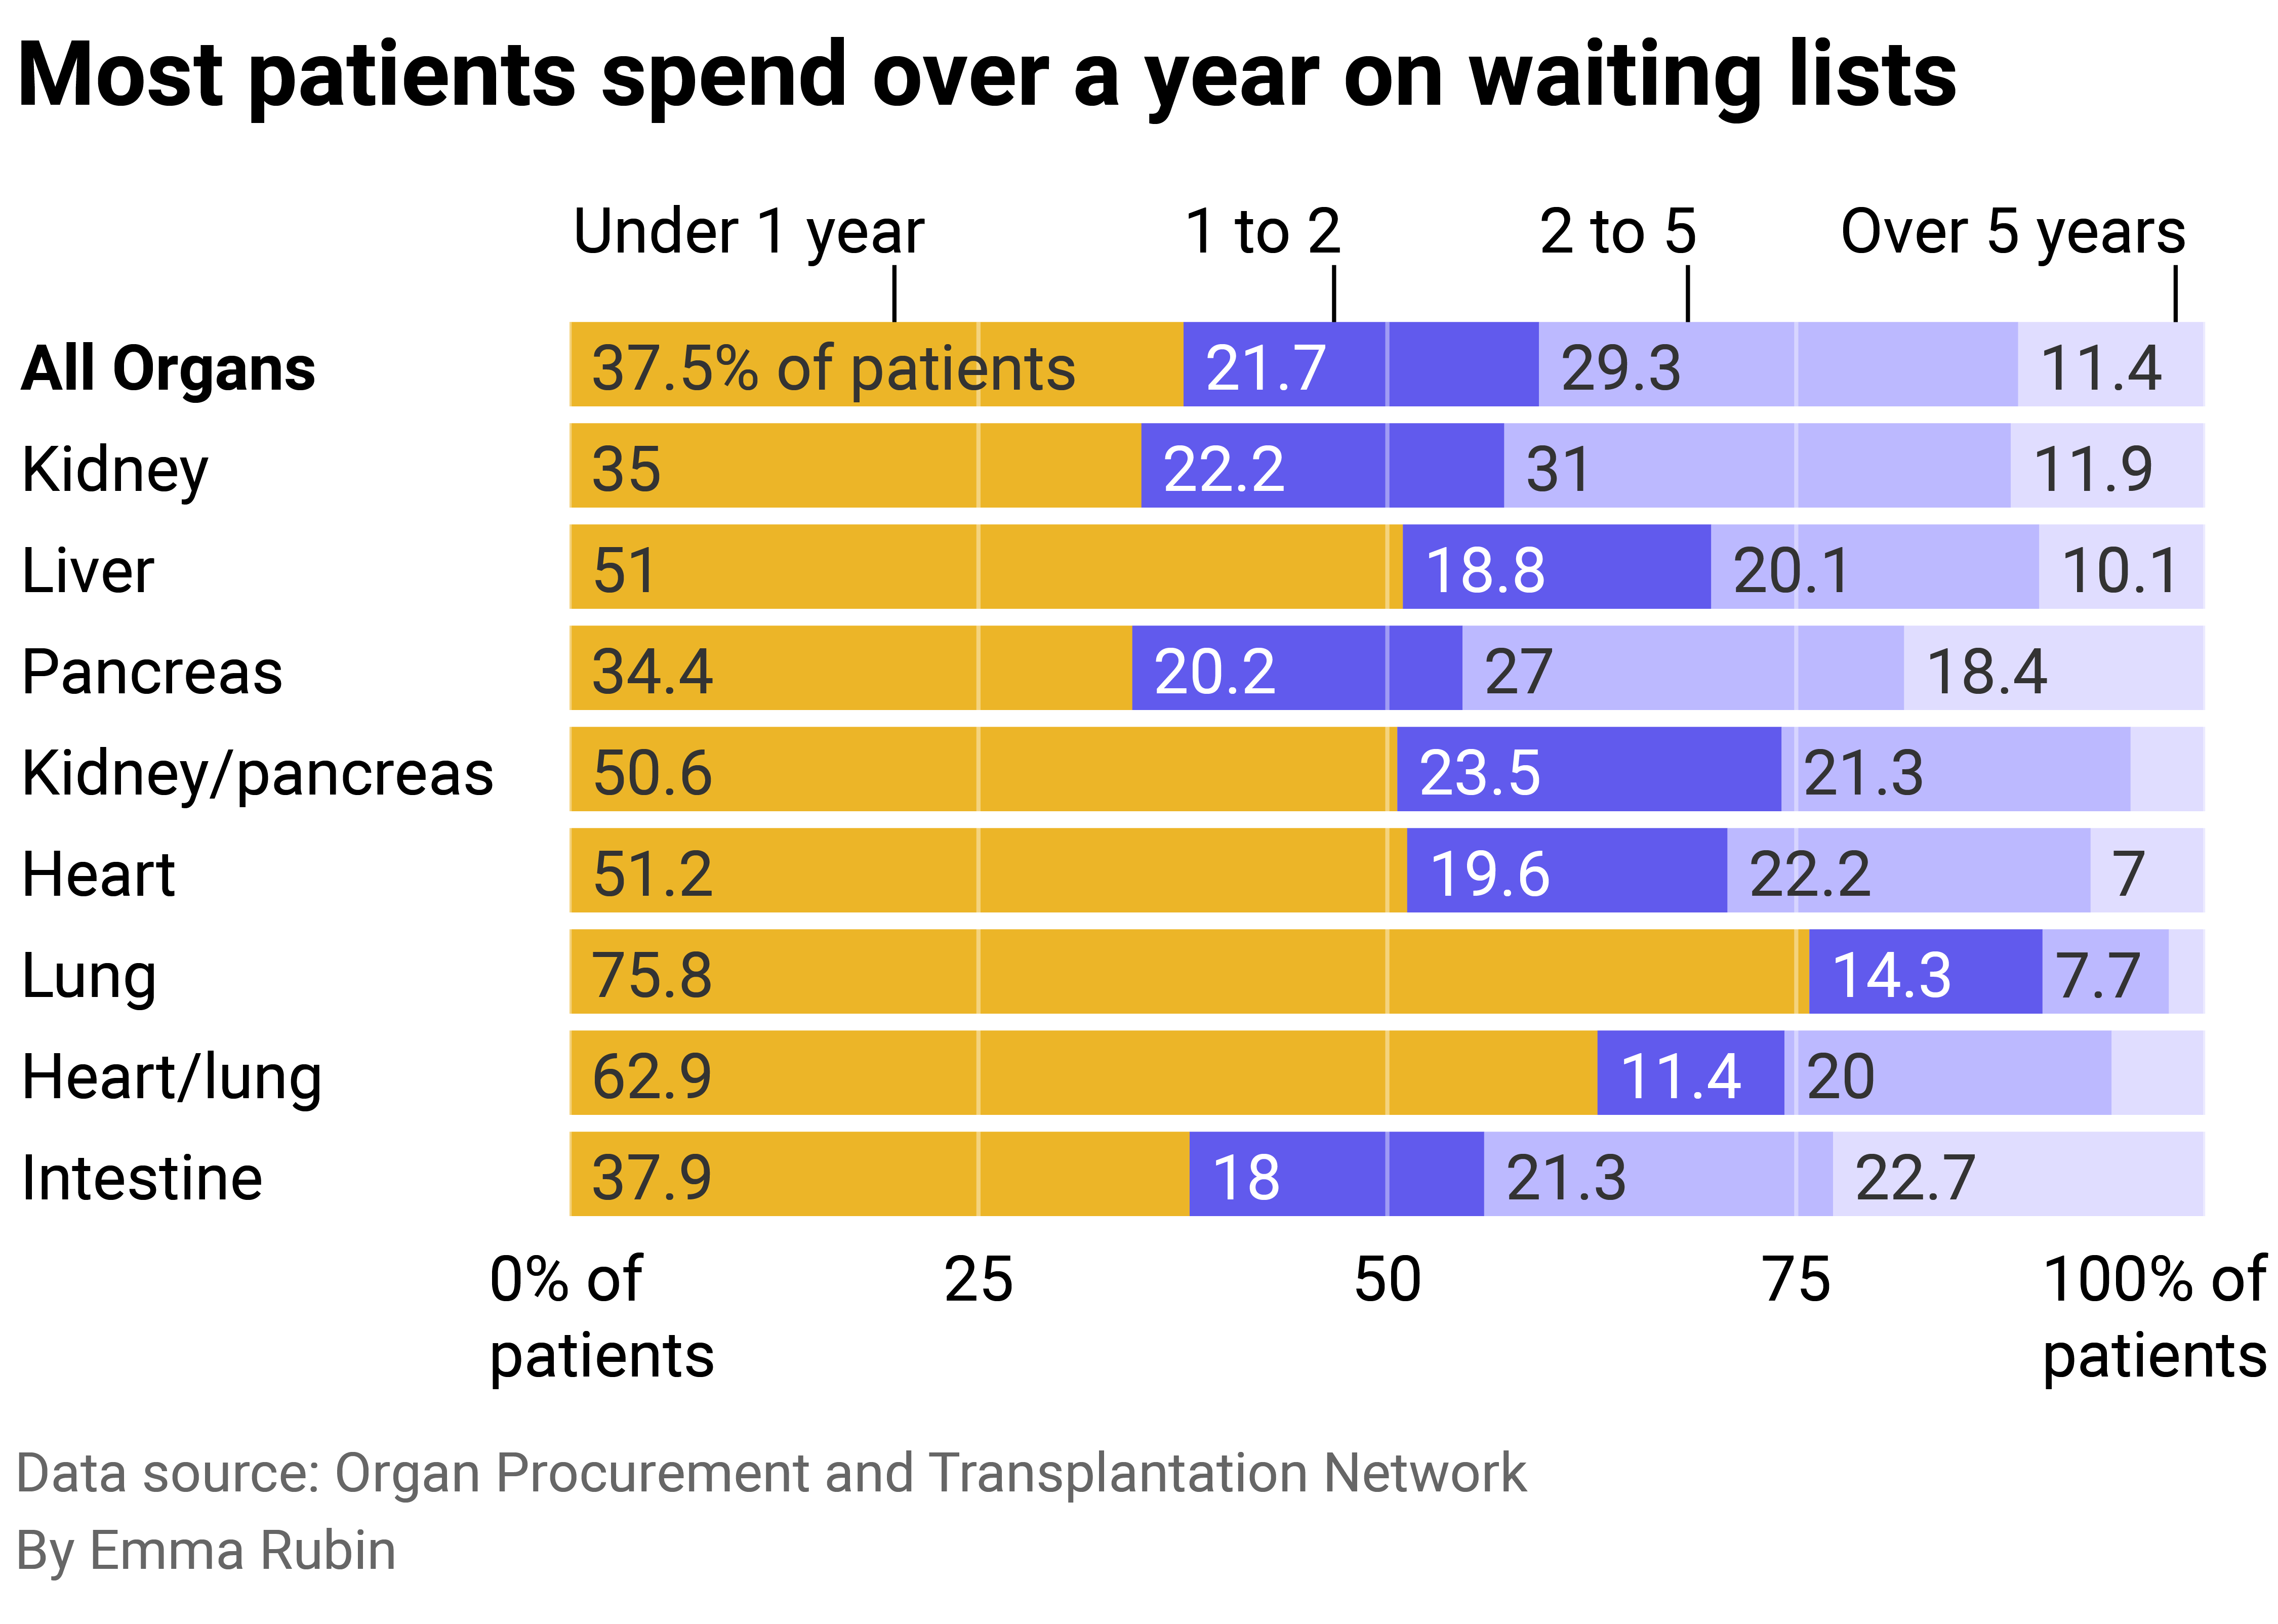 Stacked bar chart showing most patients spend over a year on waiting lists.